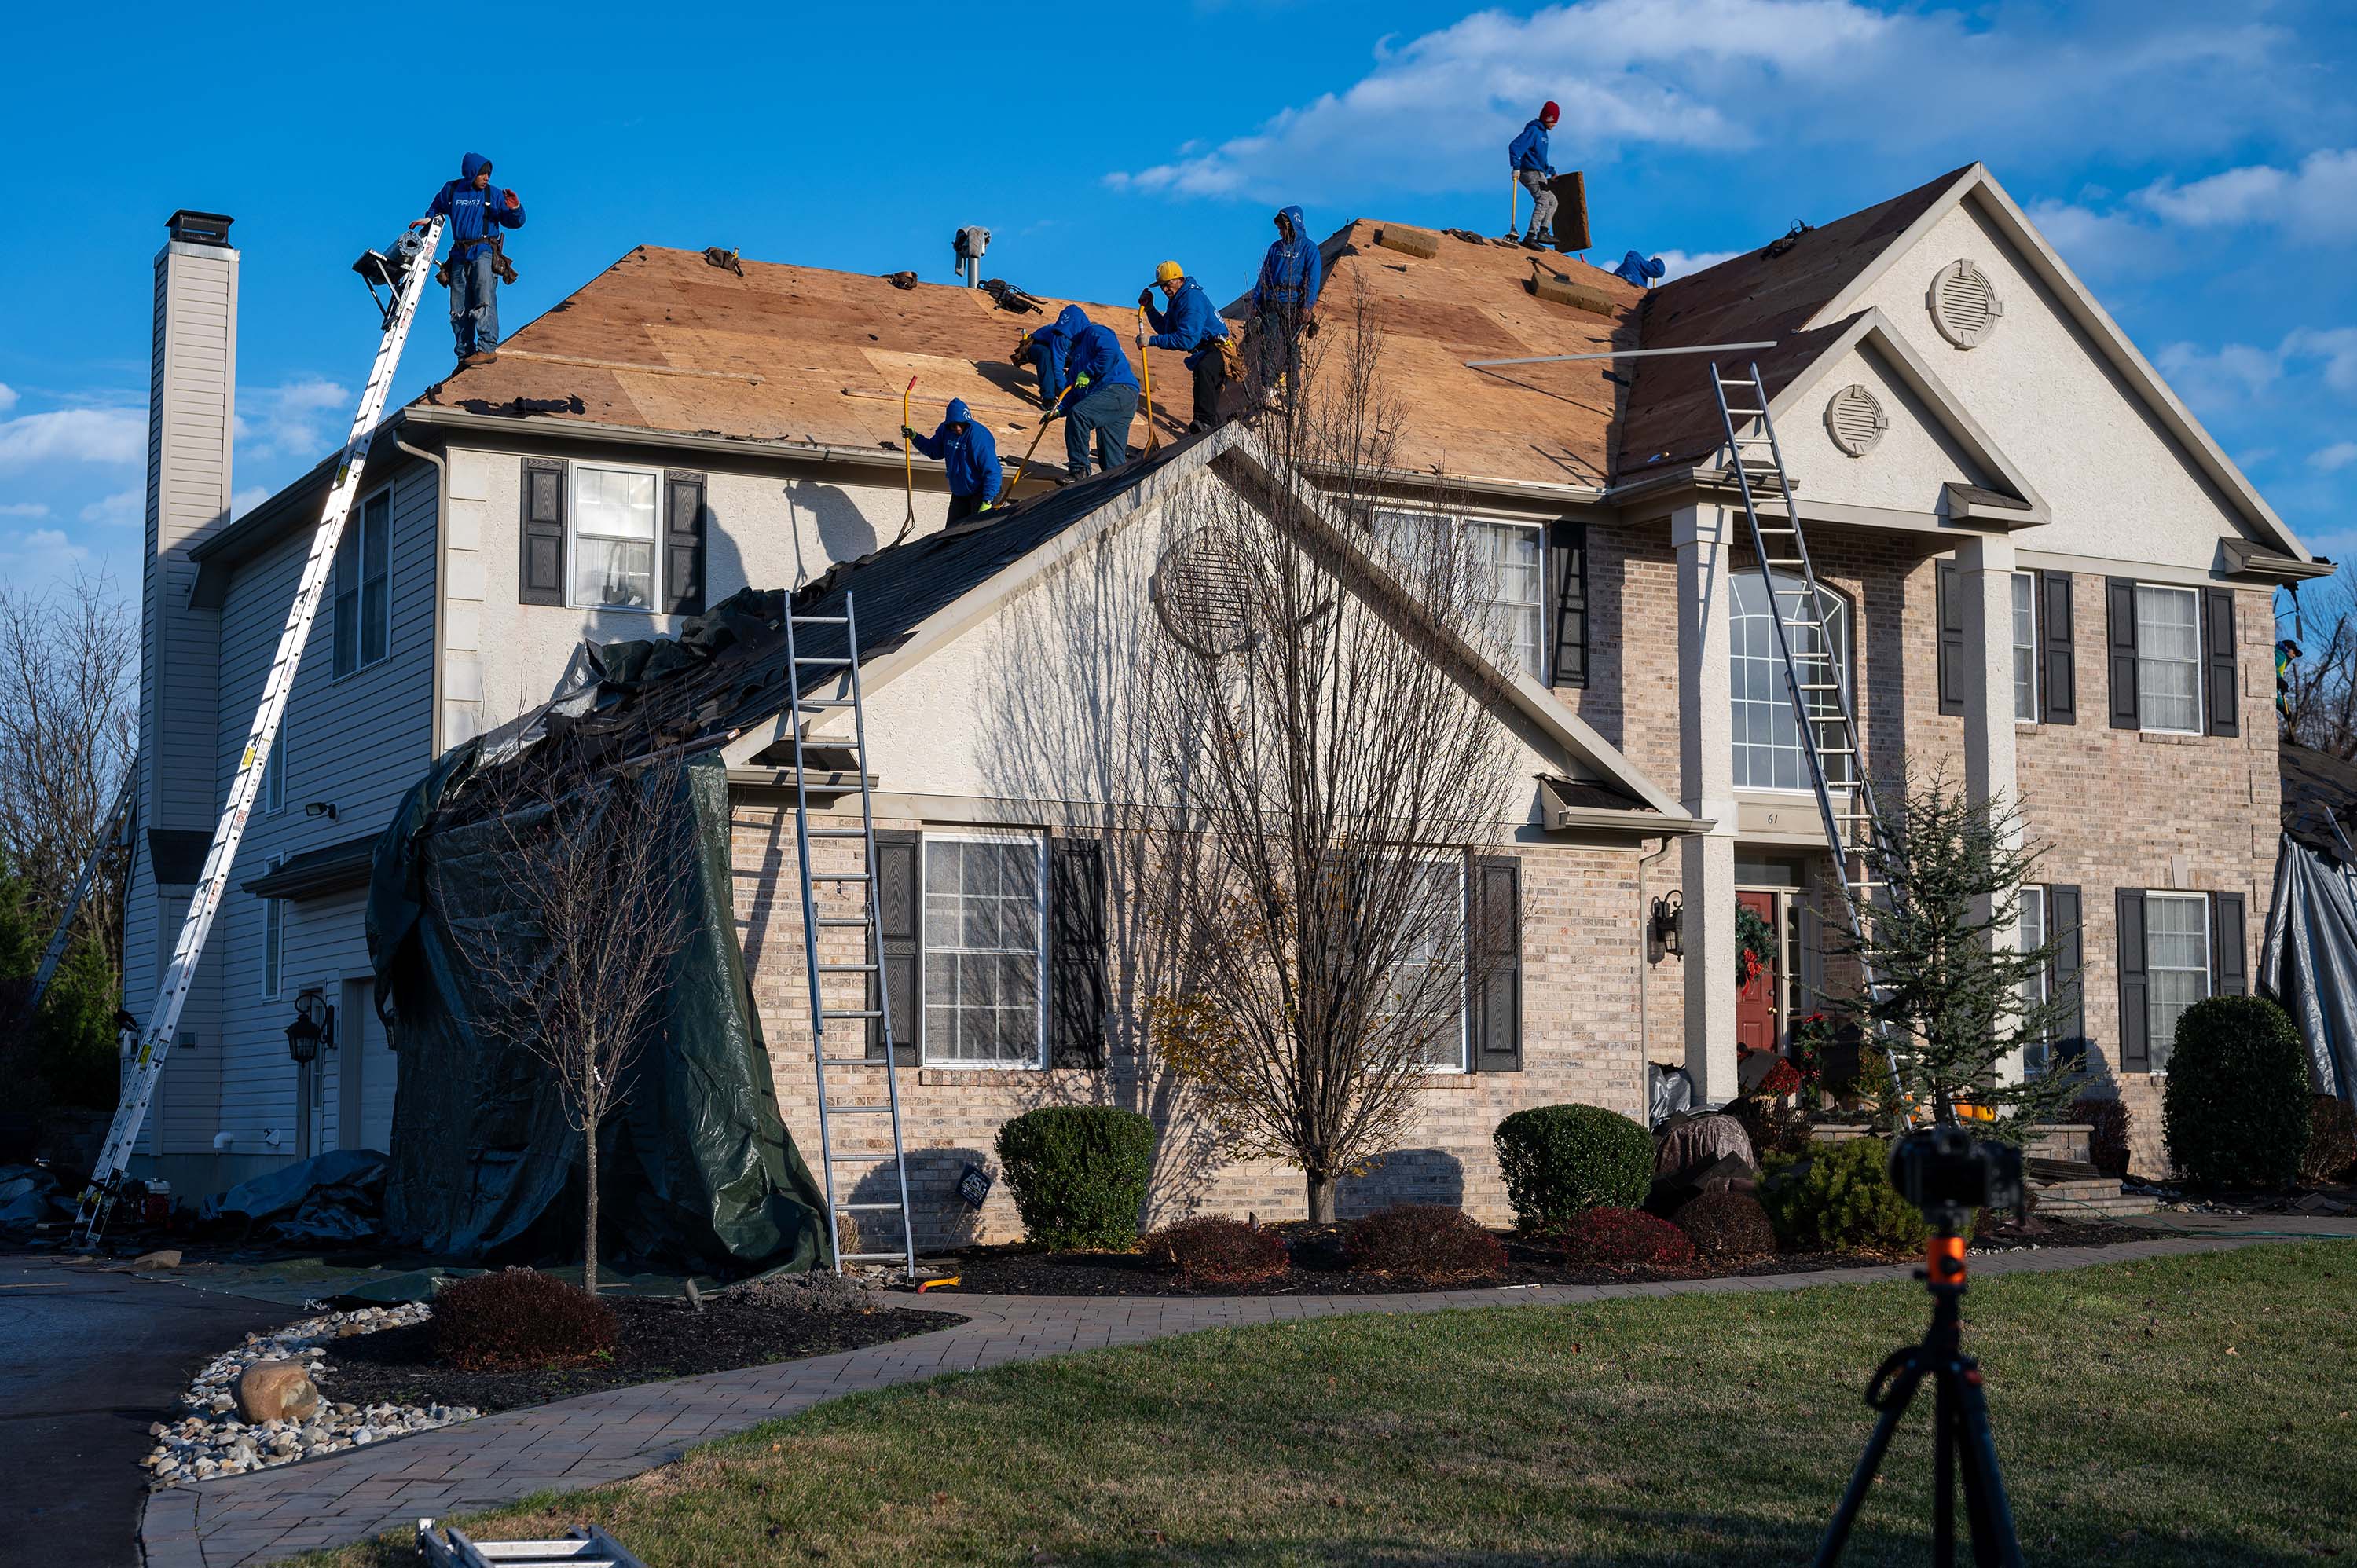 Lancaster Roofing repair company - residential roofing contractors in Lancaster, PA (large image)